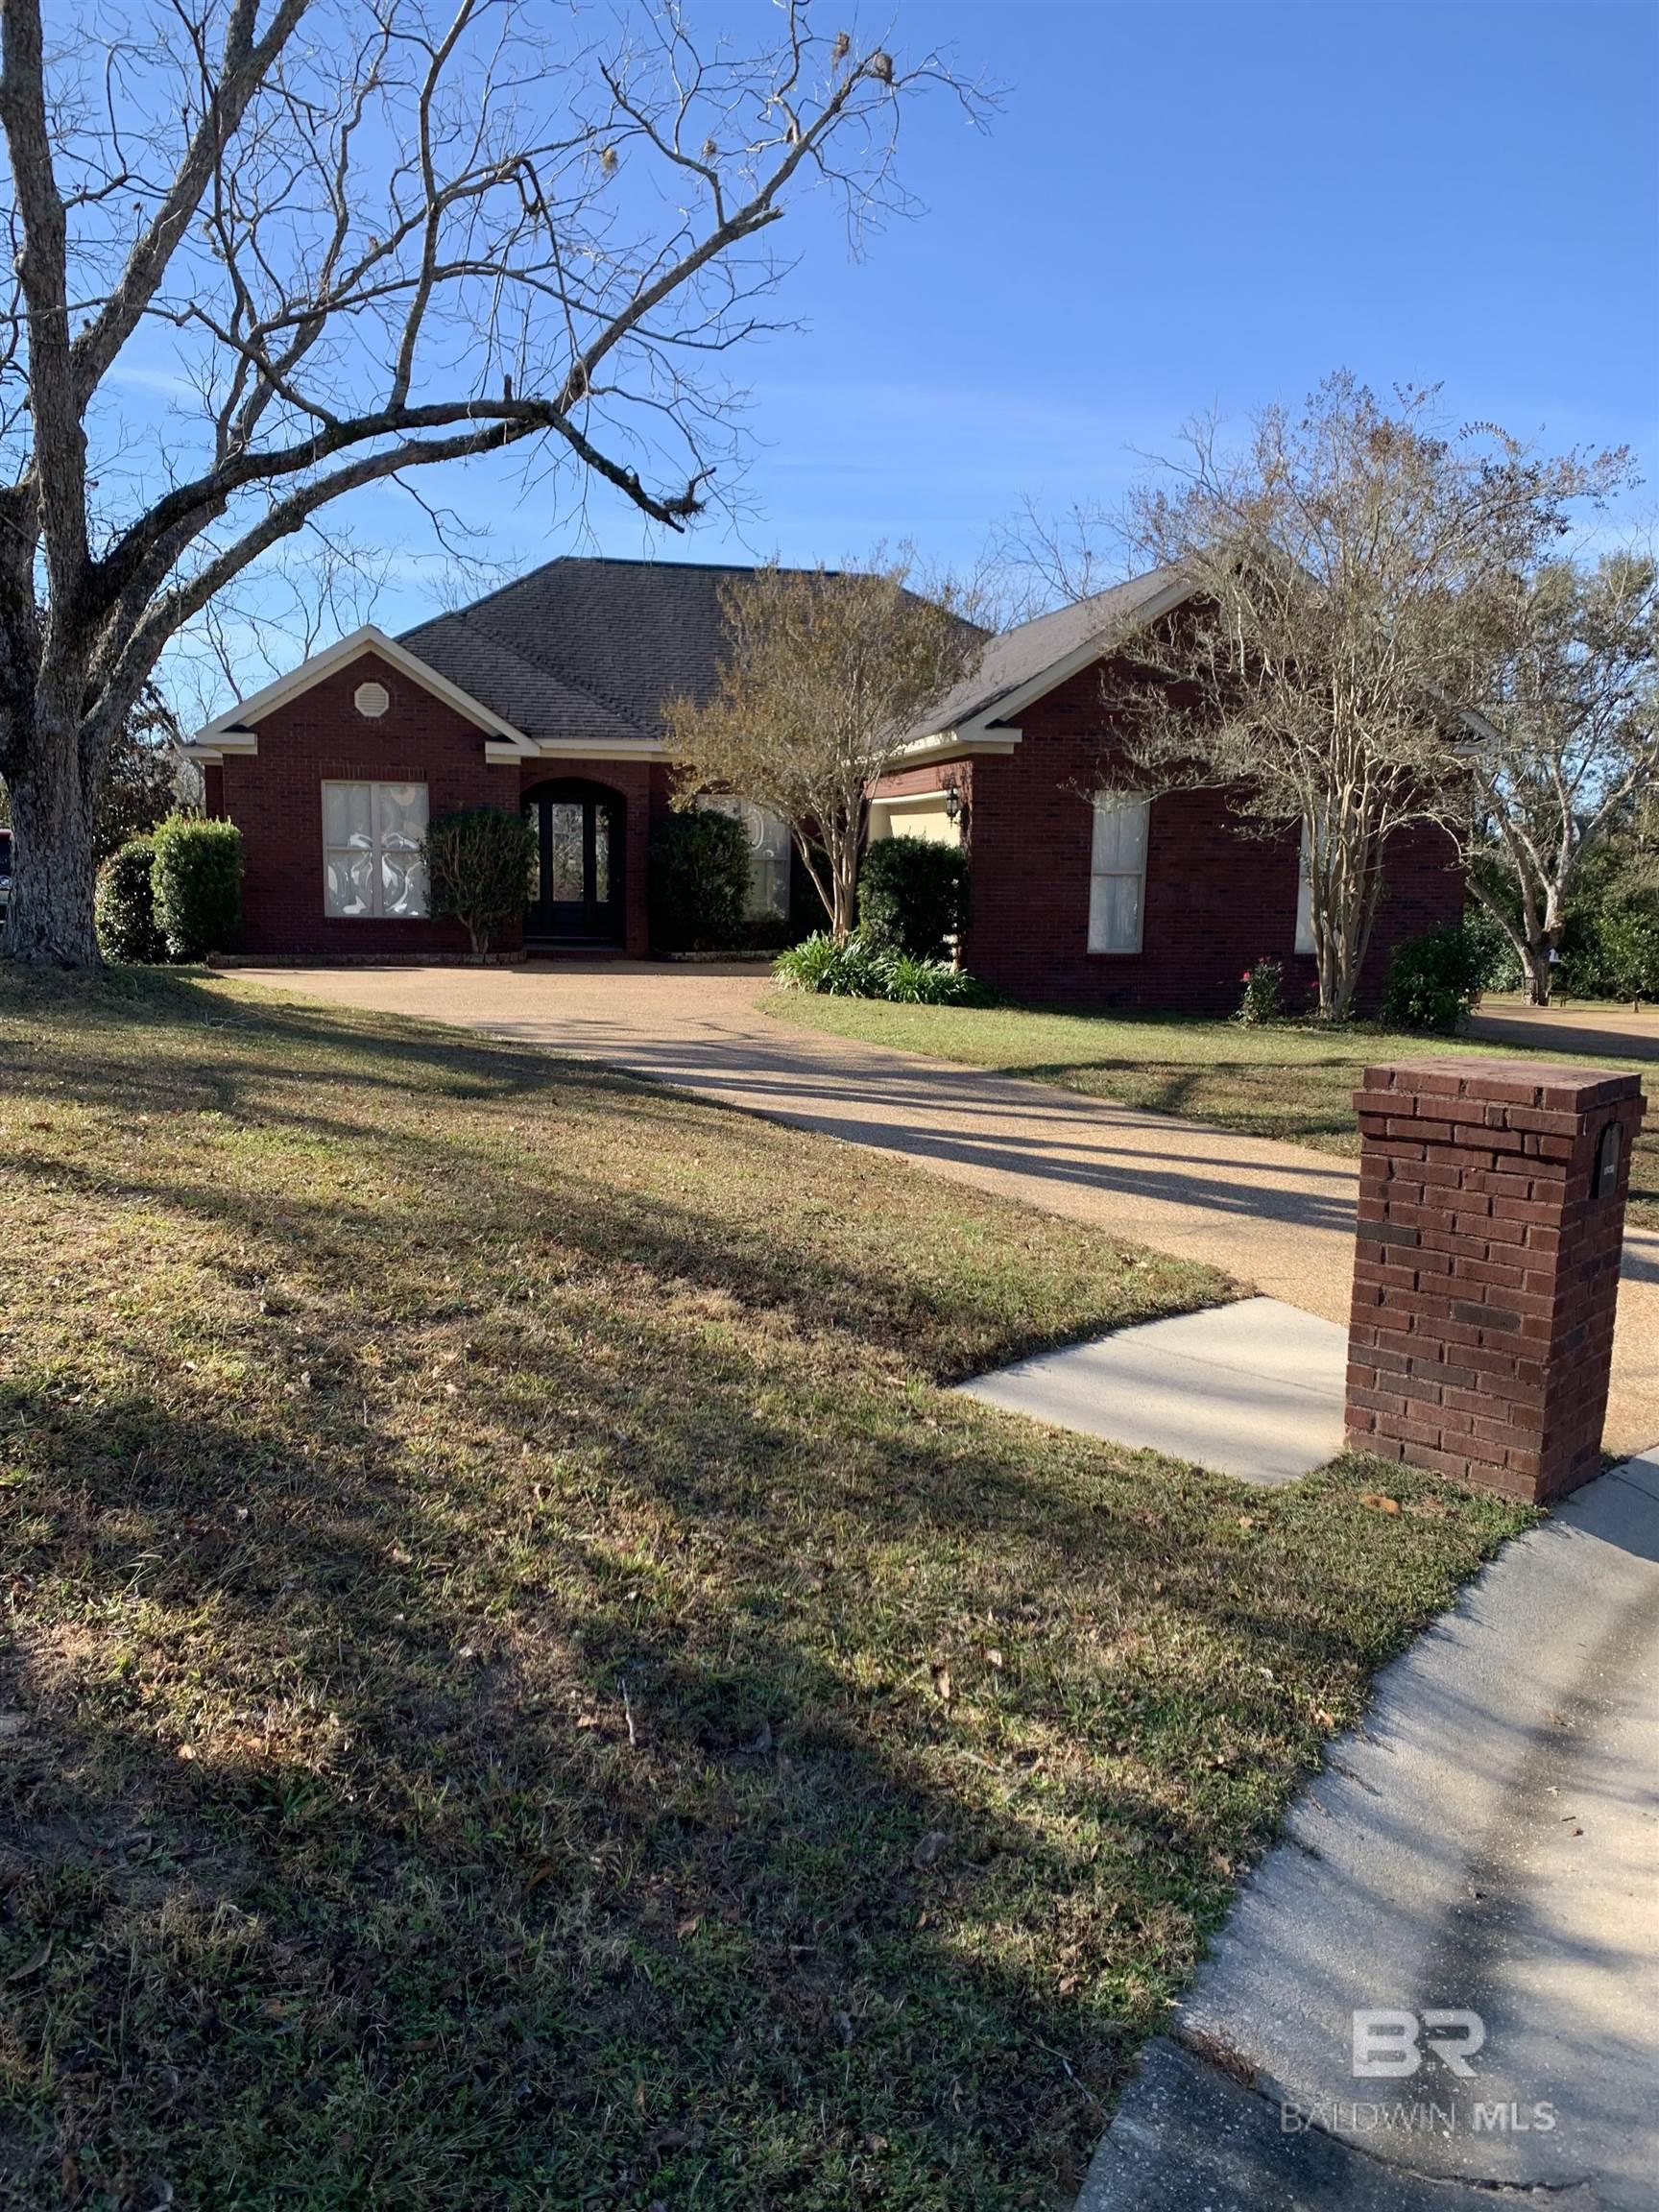 Custom built 3 BR, 2 1/2 Bath home with office in Fairfield Place subdivision. Large fenced back yard and wood deck. Custom finishes with hardwood floors and custom trim package. Oversize garage and lots of storage.